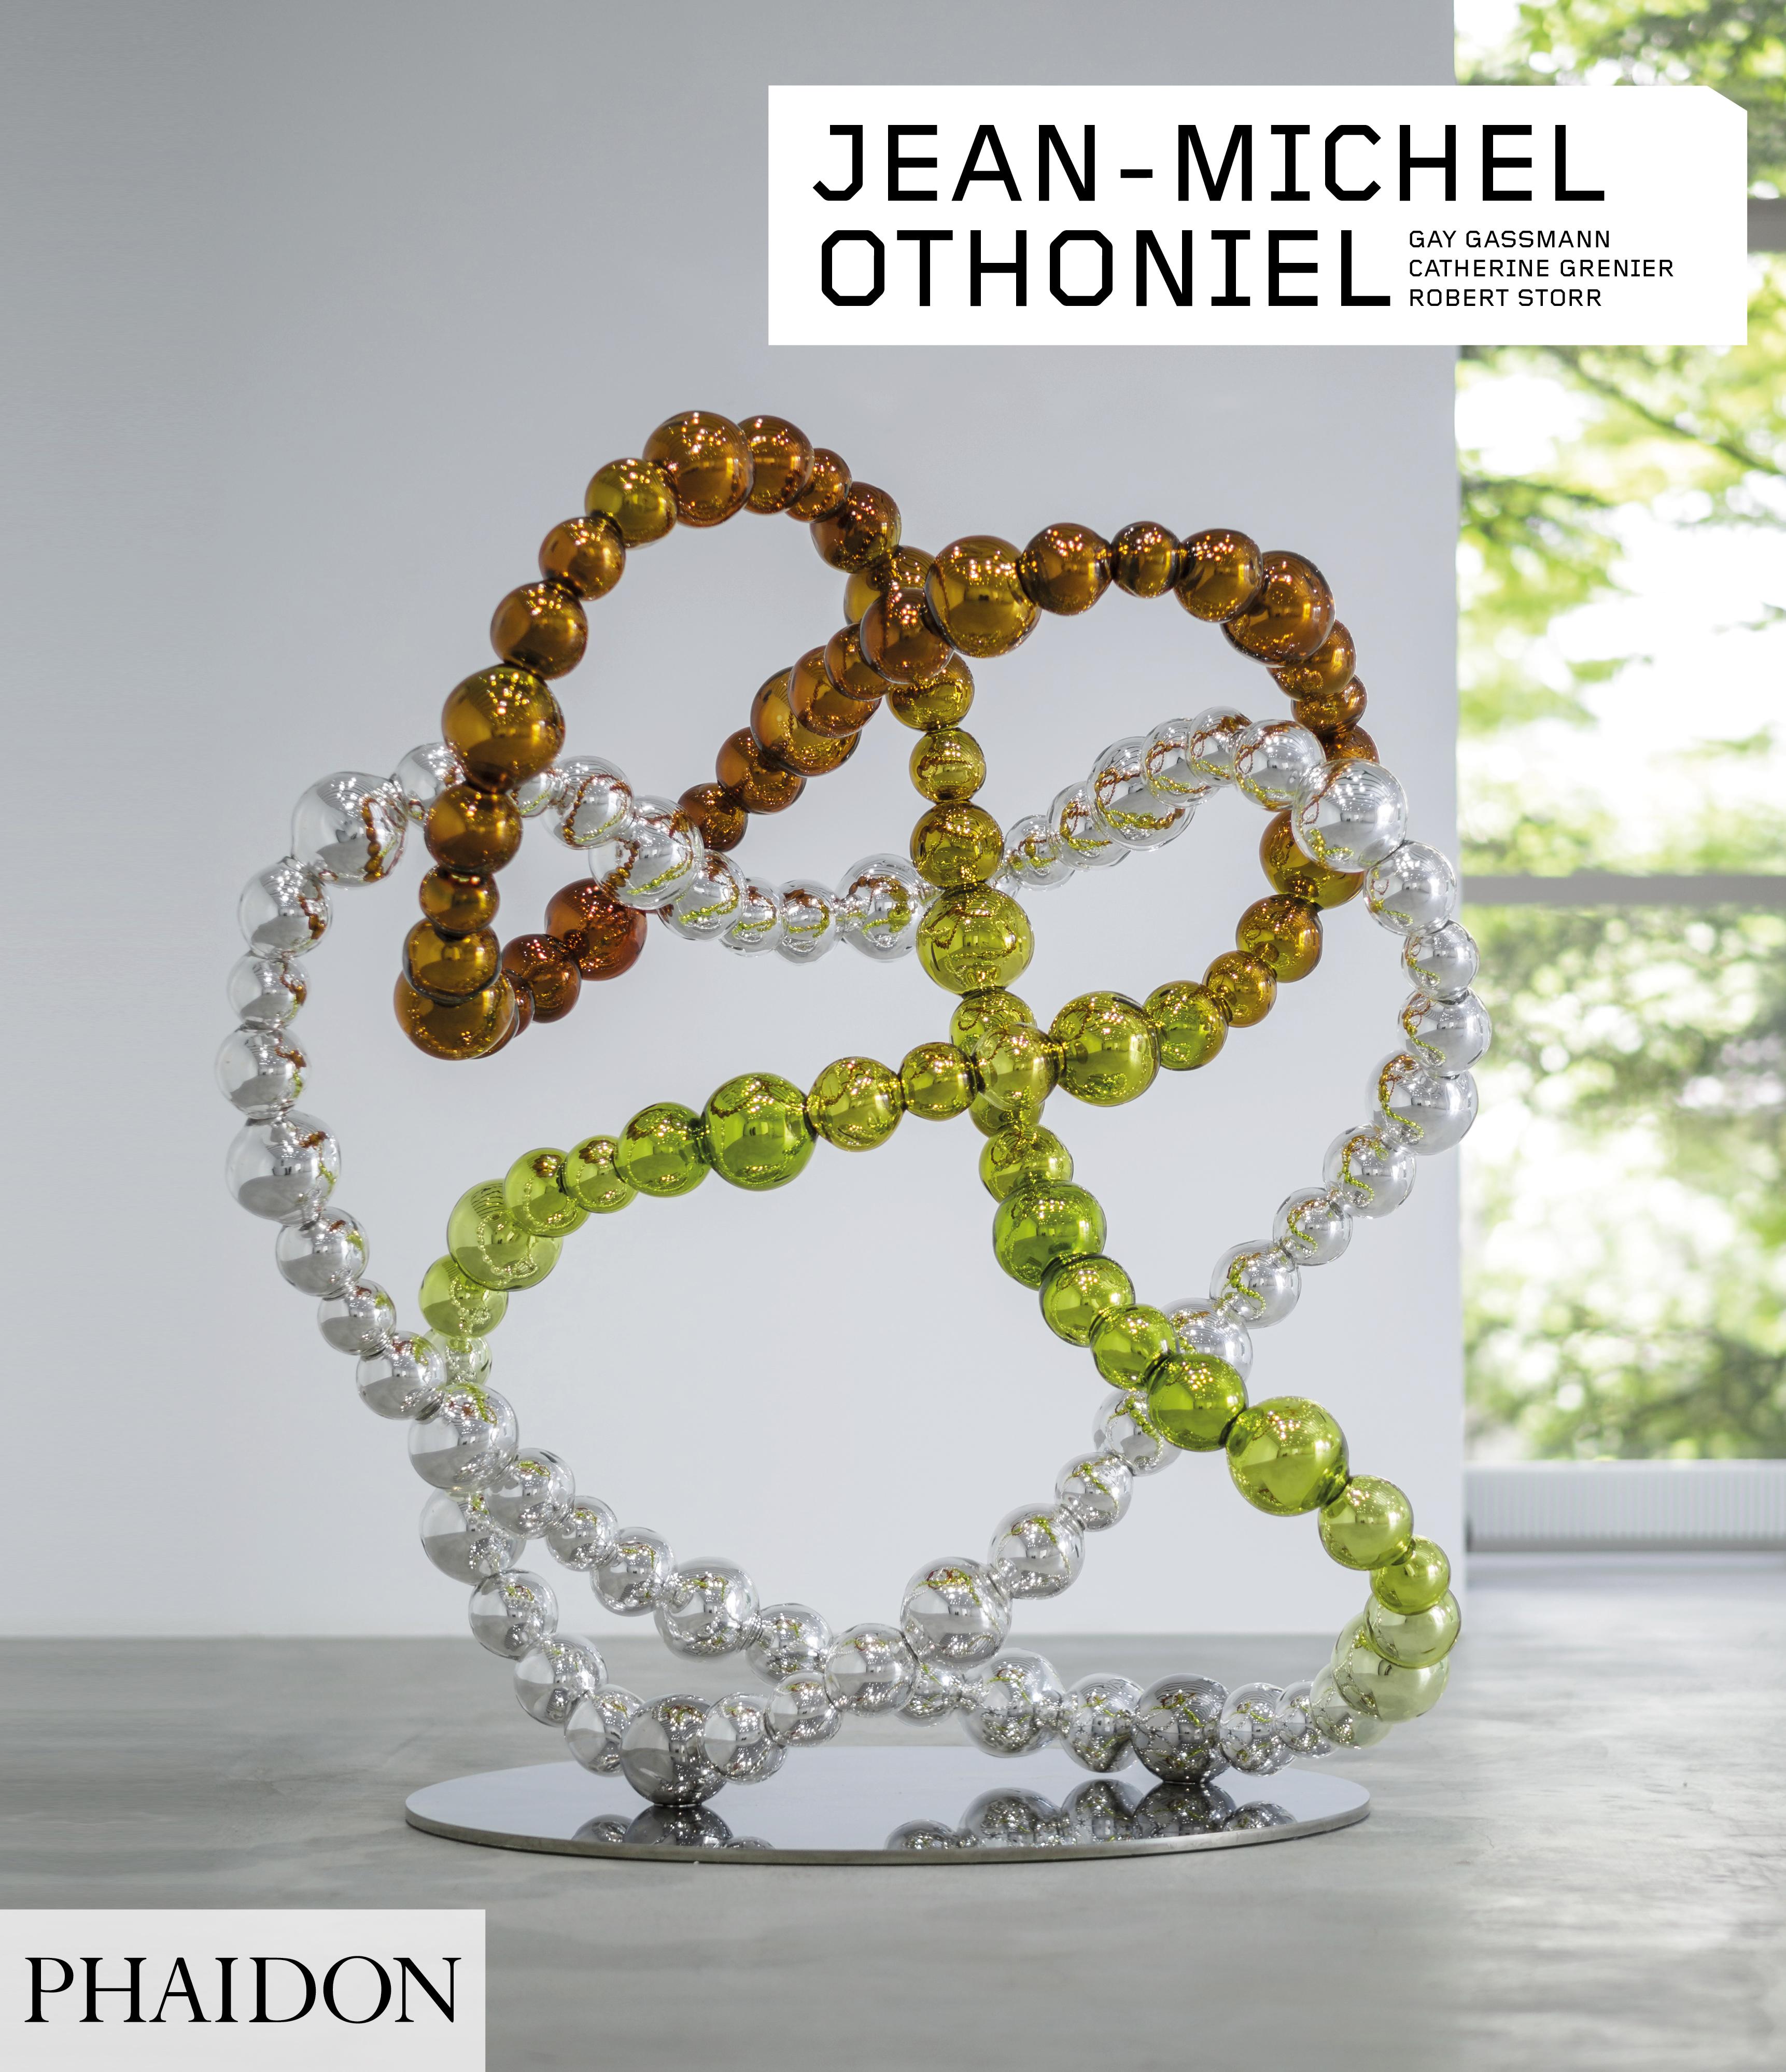 Jean-Michel Othoniel 'Phaidon Contemporary Artists Series' For Sale 3